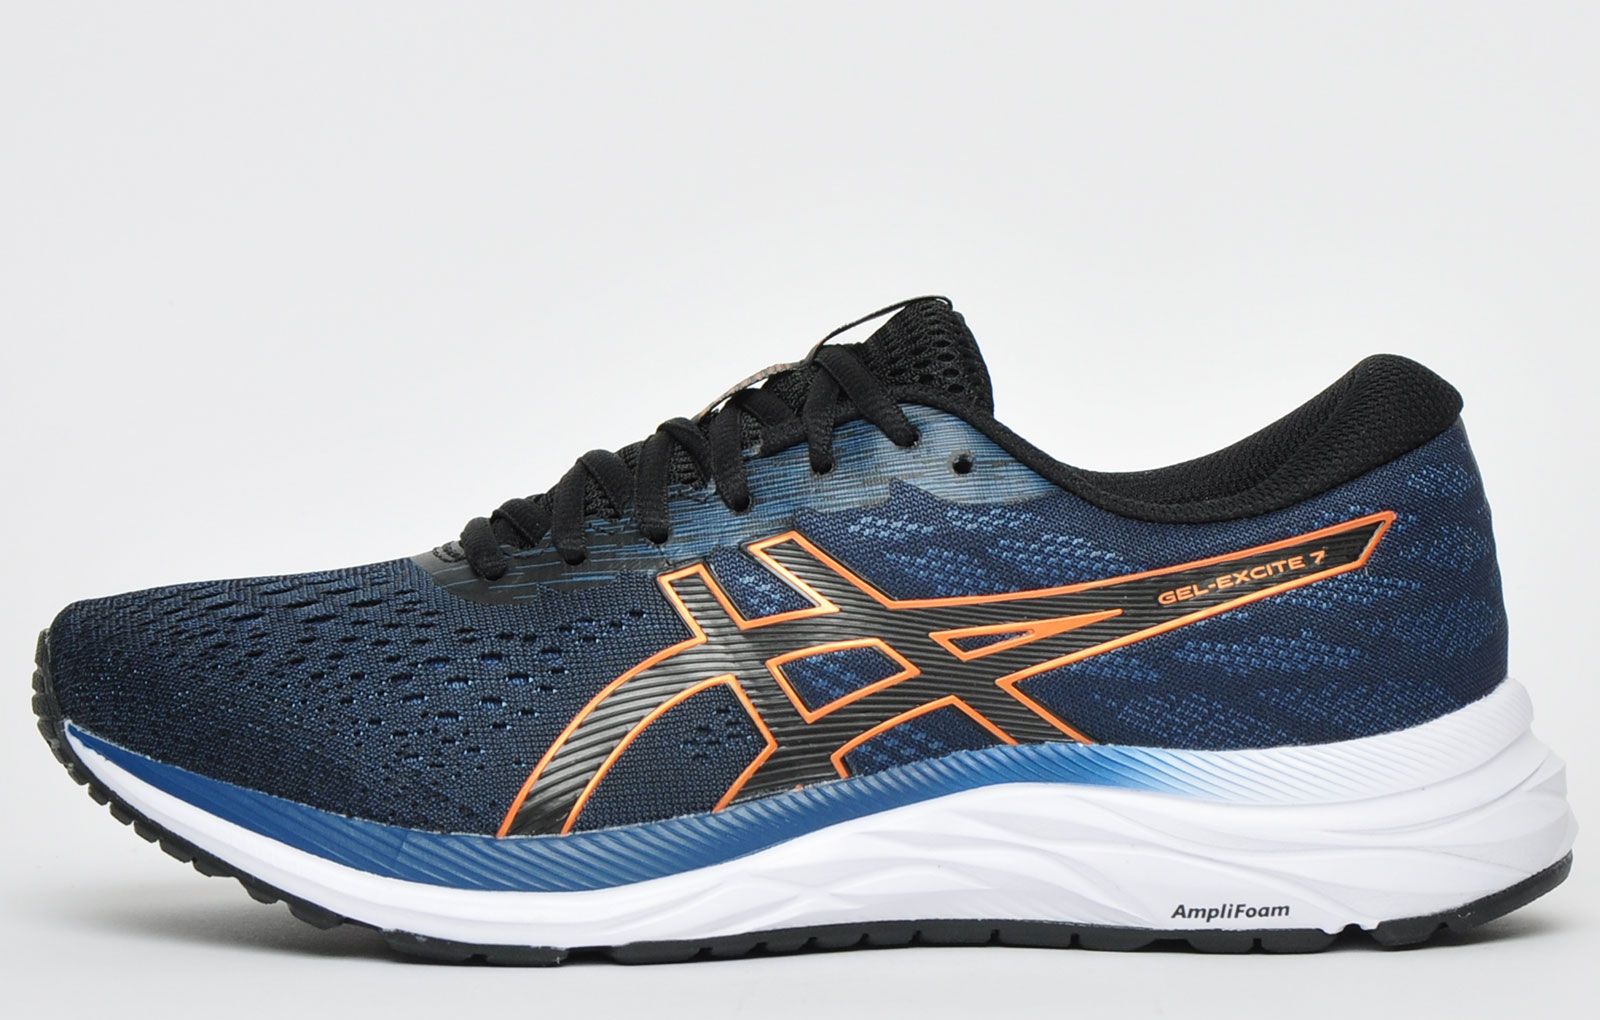 These Asics Gel- Excite 7 men’s running shoes are crafted from a breathable lightweight technical textile mesh to provide optimised breathability and keep feet cool and dry throughout wear. Featuring synthetic overlays to keep you supported, and ensuring a more comfortable, secure running experience, this shoe is a great road runner as well as a gym worker. <p class=